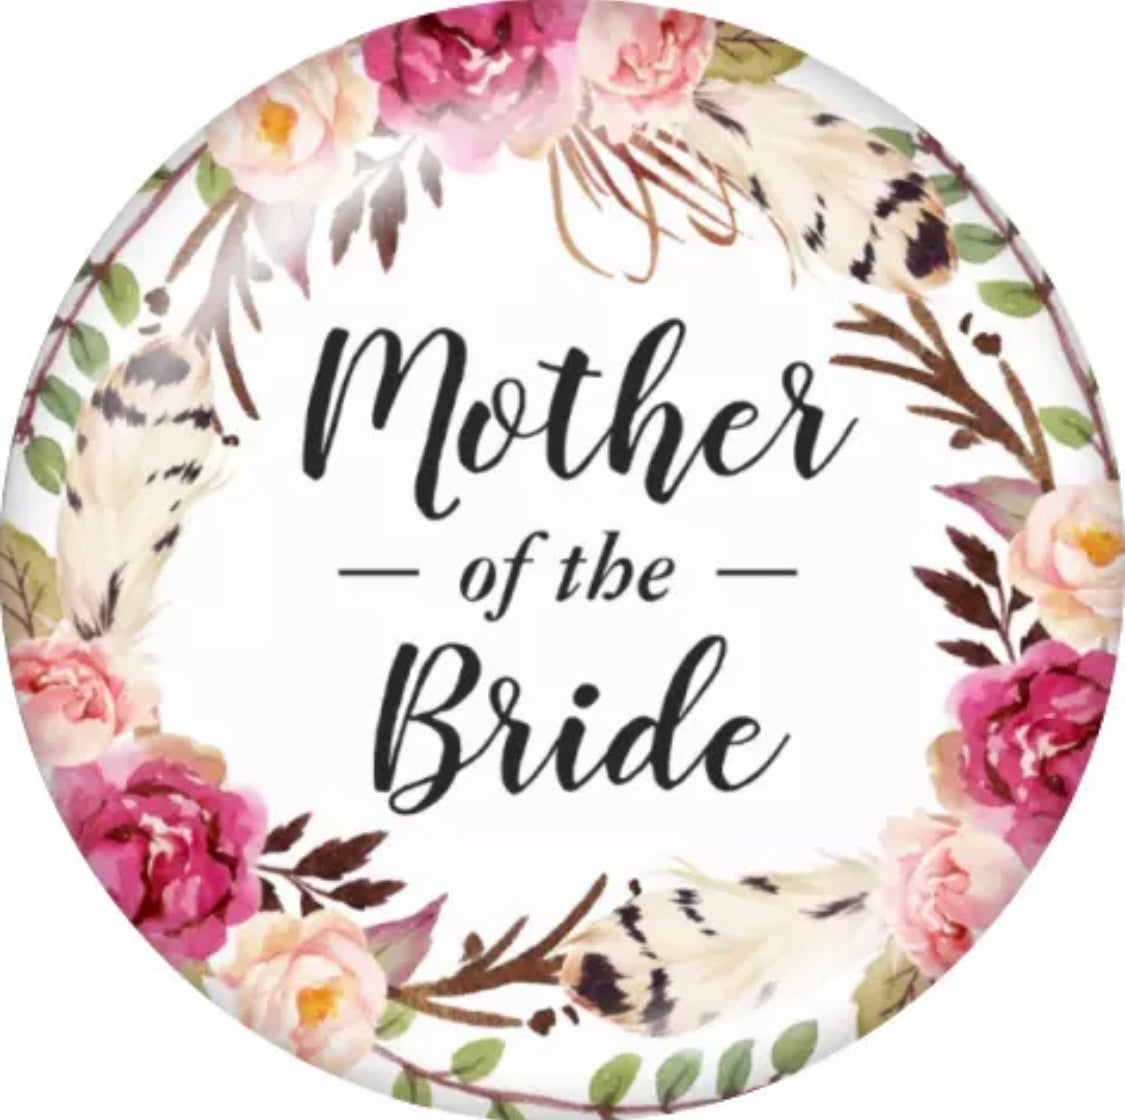 Mother of the Bride (Light Floral)-12mm Glass Cabochon